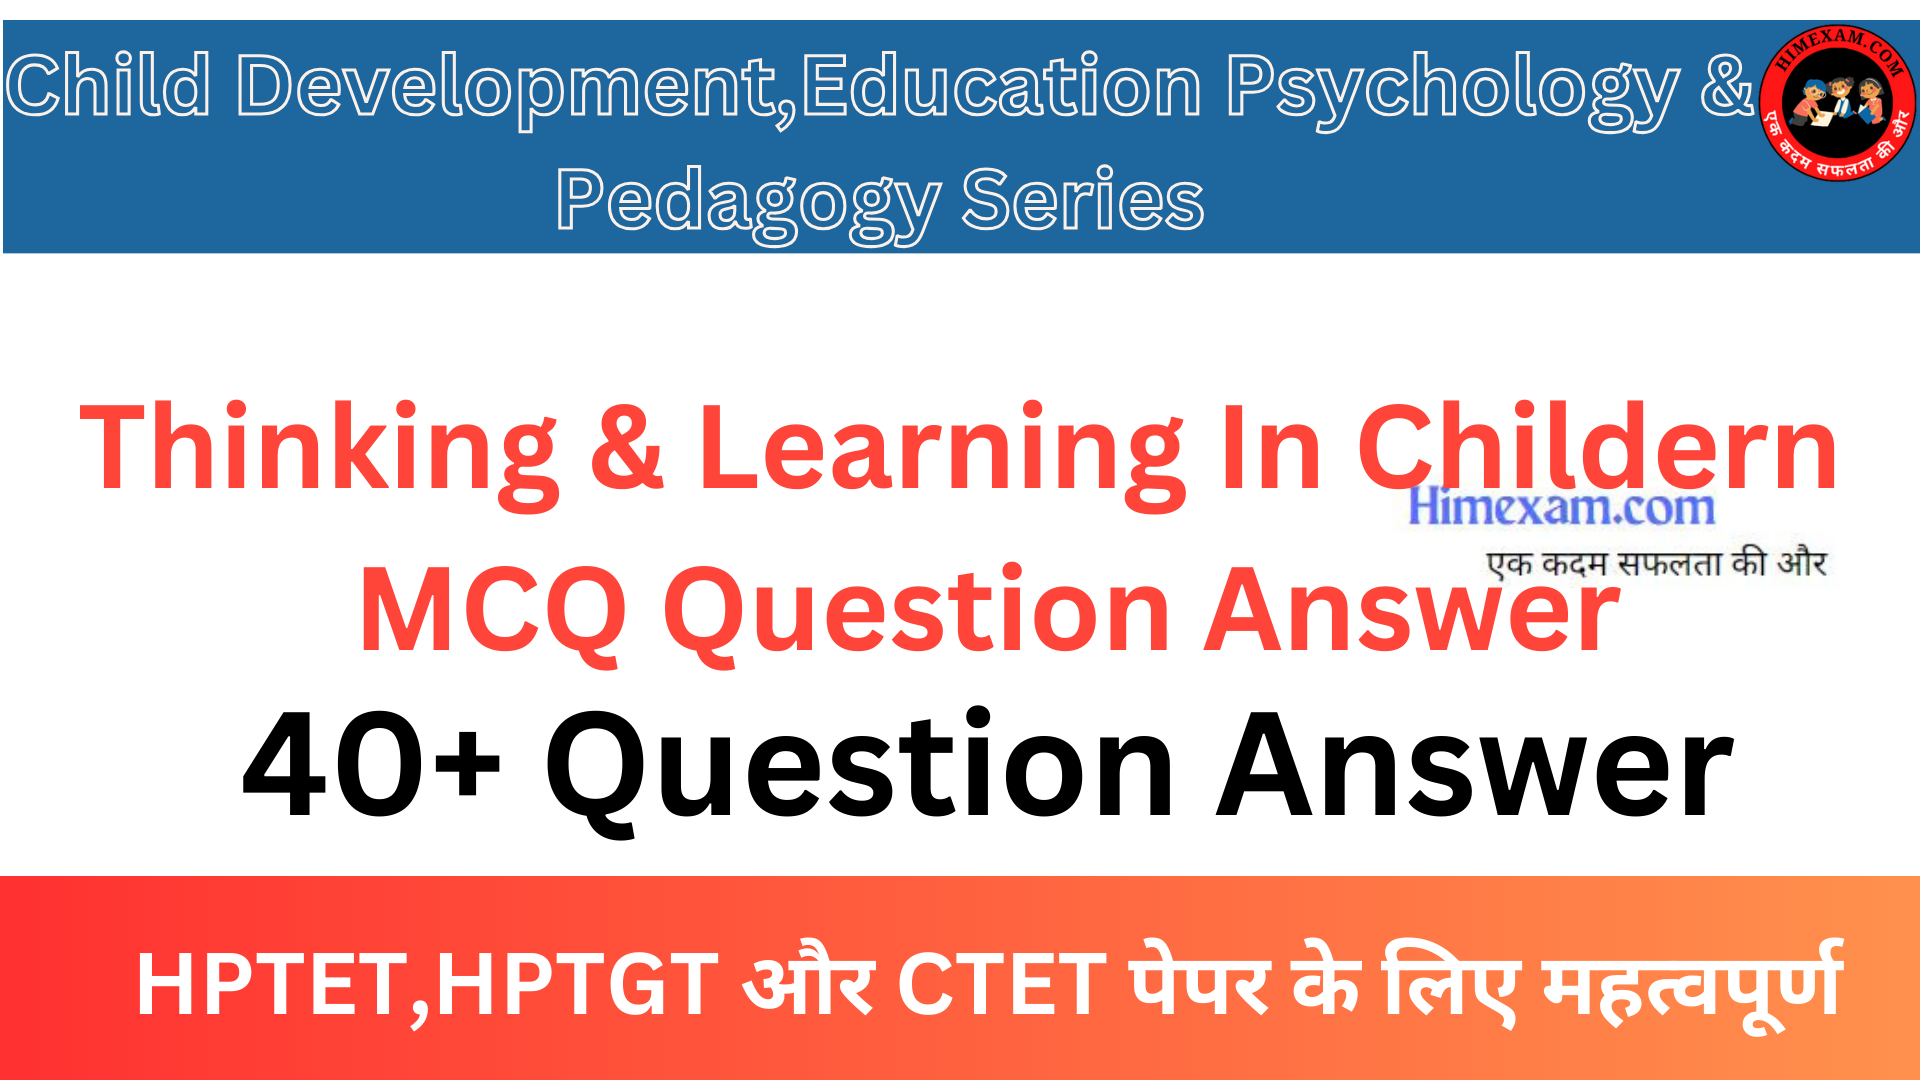 Thinking & Learning In Childern MCQ Question Answer For TET & TGT Exam